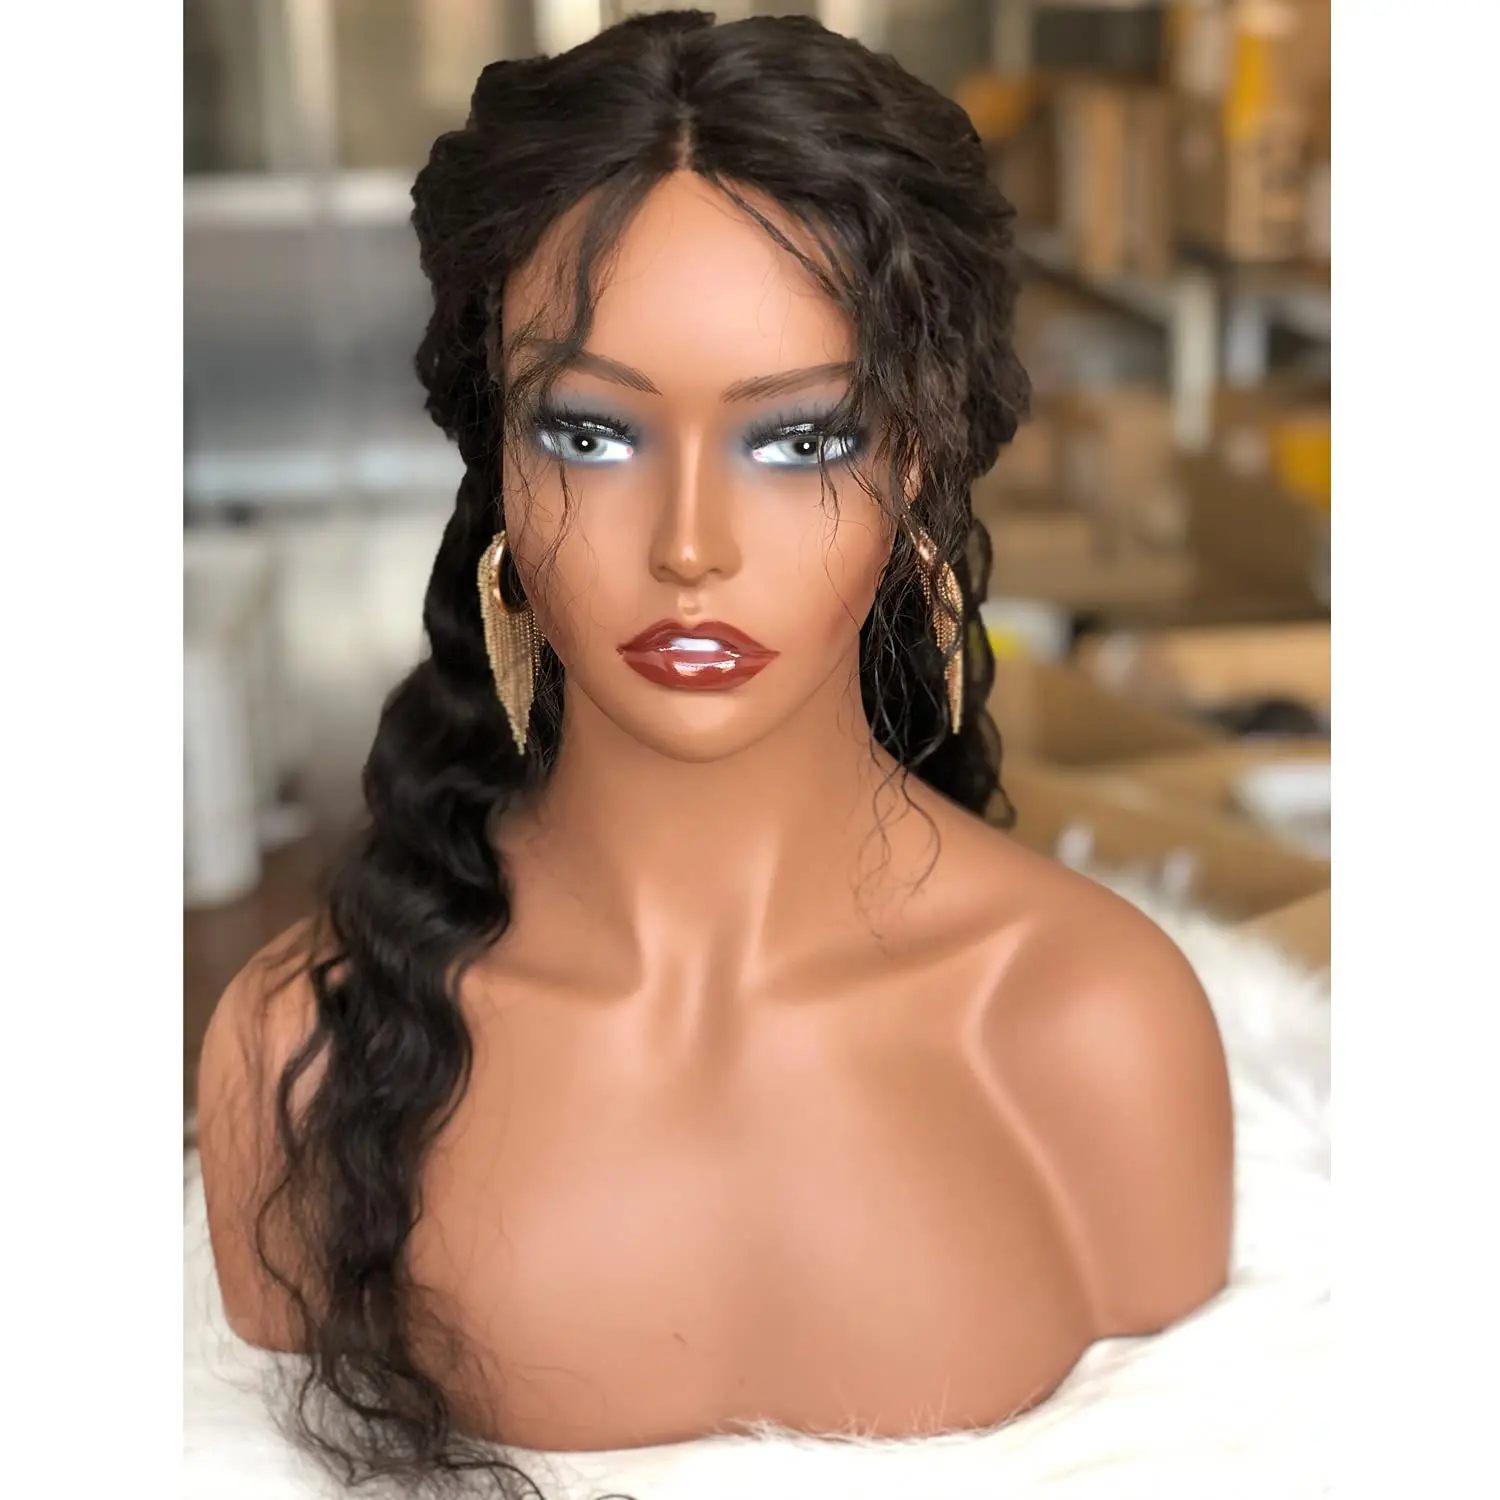 mannequin-head-with-shoulder-manikin-pvc-head-bust-wig-head-stand-for-wigs-display-makingstylingsunglassesnecklace-earrings